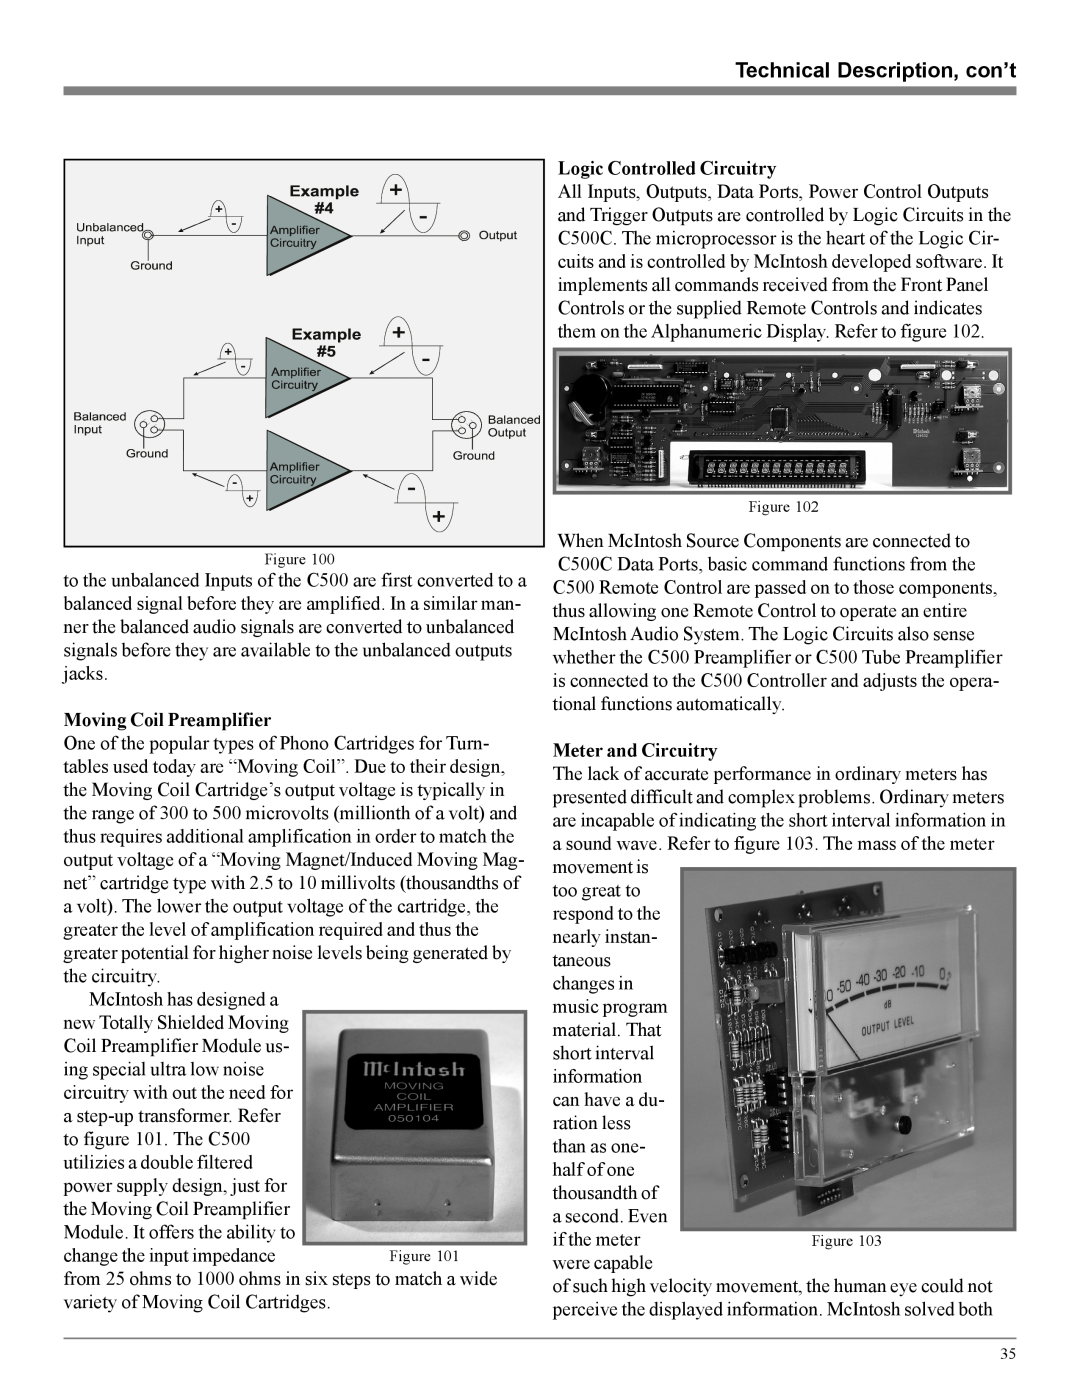 McIntosh C500 Technical Description, con’t, Moving Coil Preamplifier, Logic Controlled Circuitry, Meter and Circuitry 